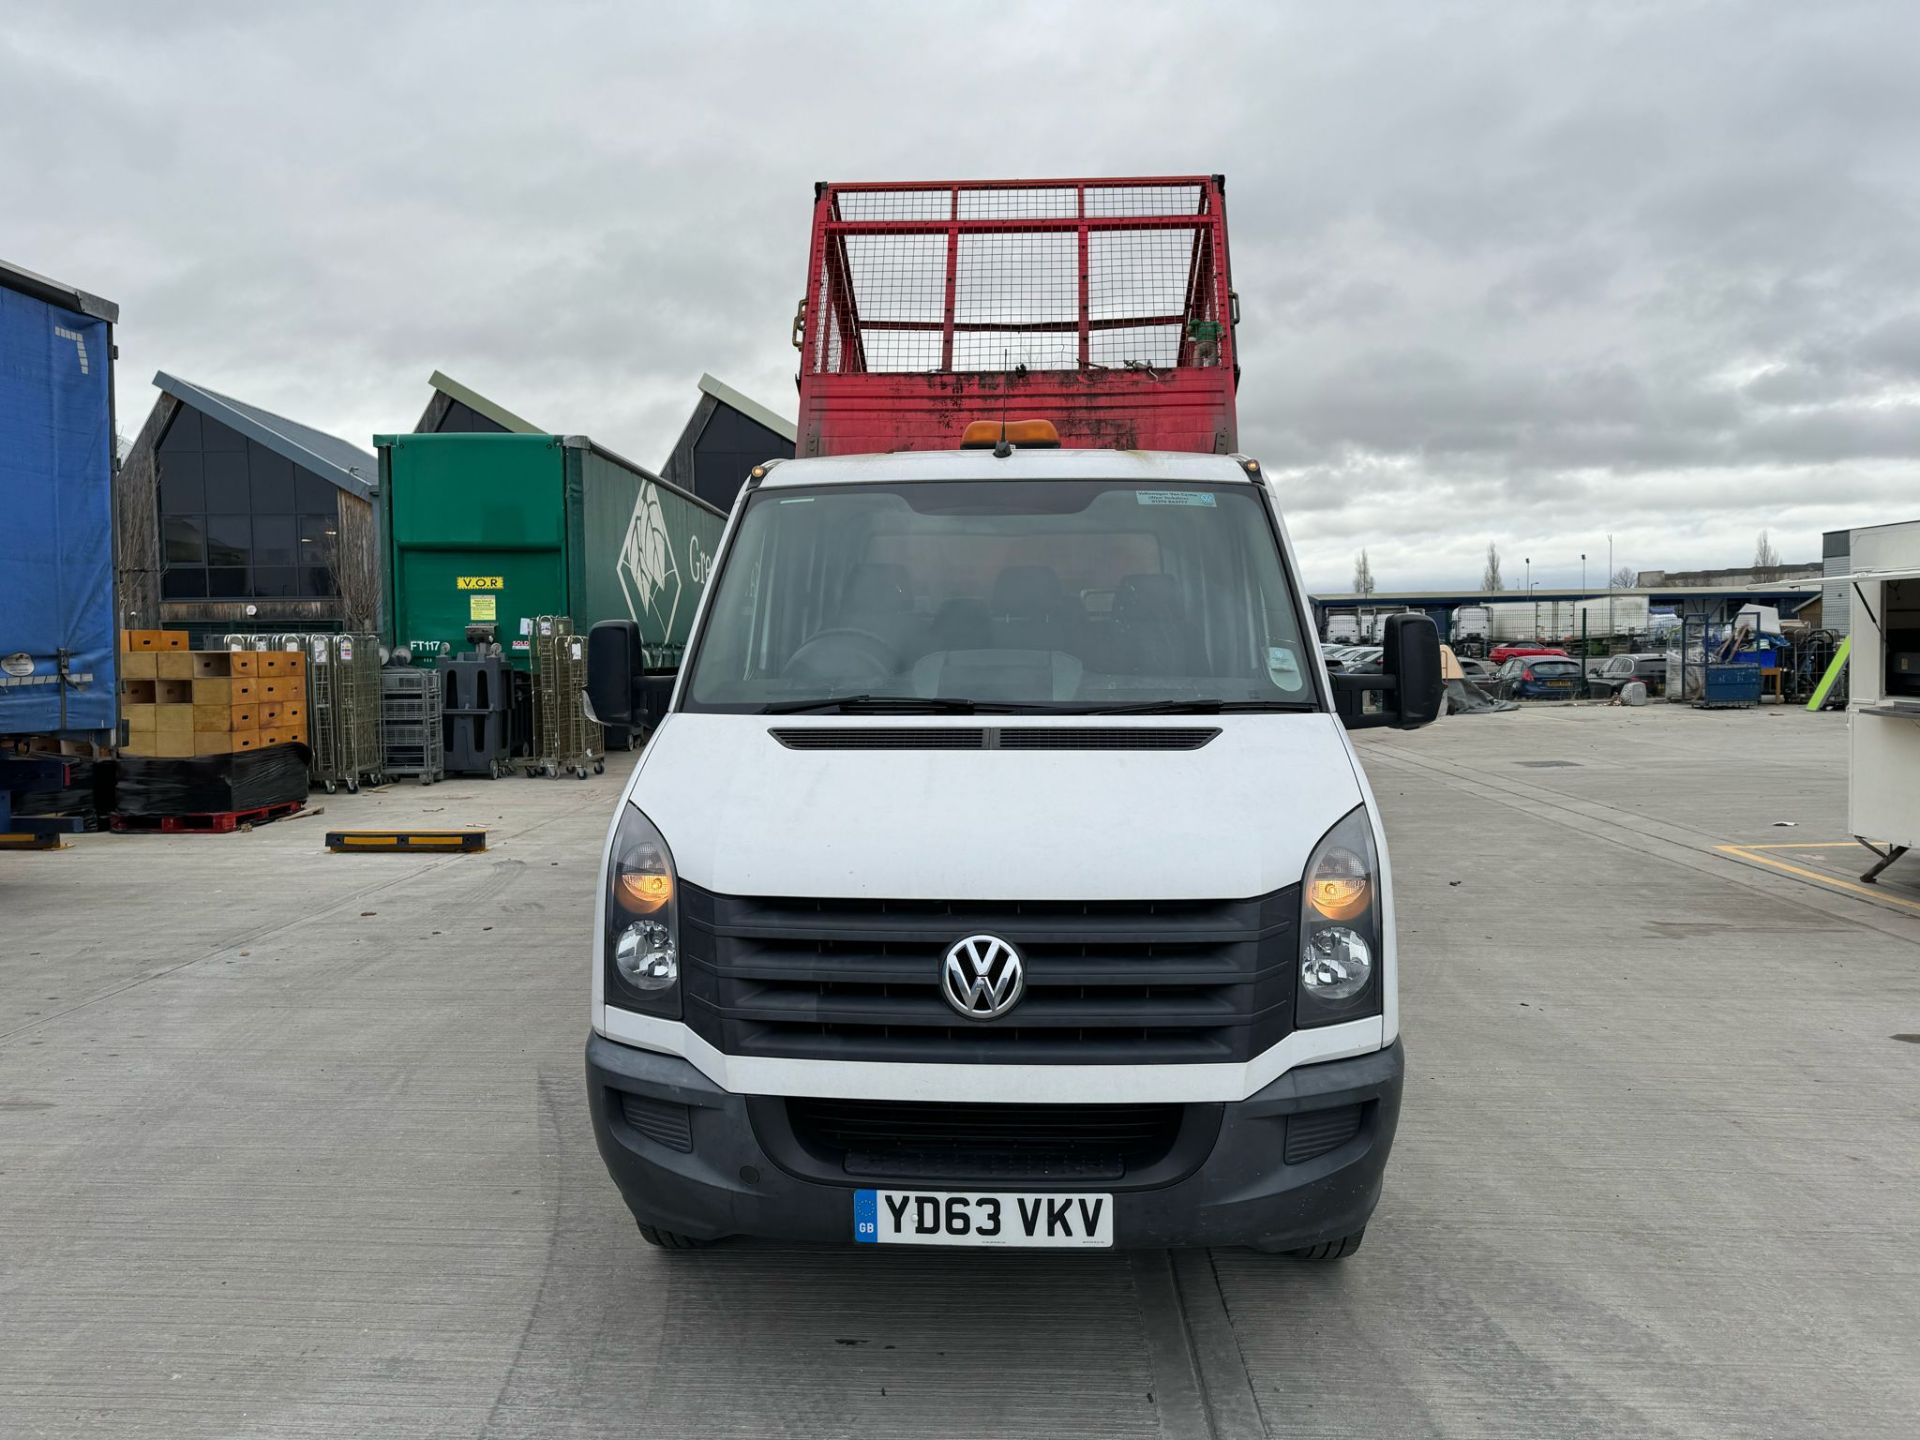 2013, VOLKSWAGEN Crafter CR50 Startline TDI, HGV Caged Tipper Van (Ex-Council Owned & Maintained) - Image 24 of 42